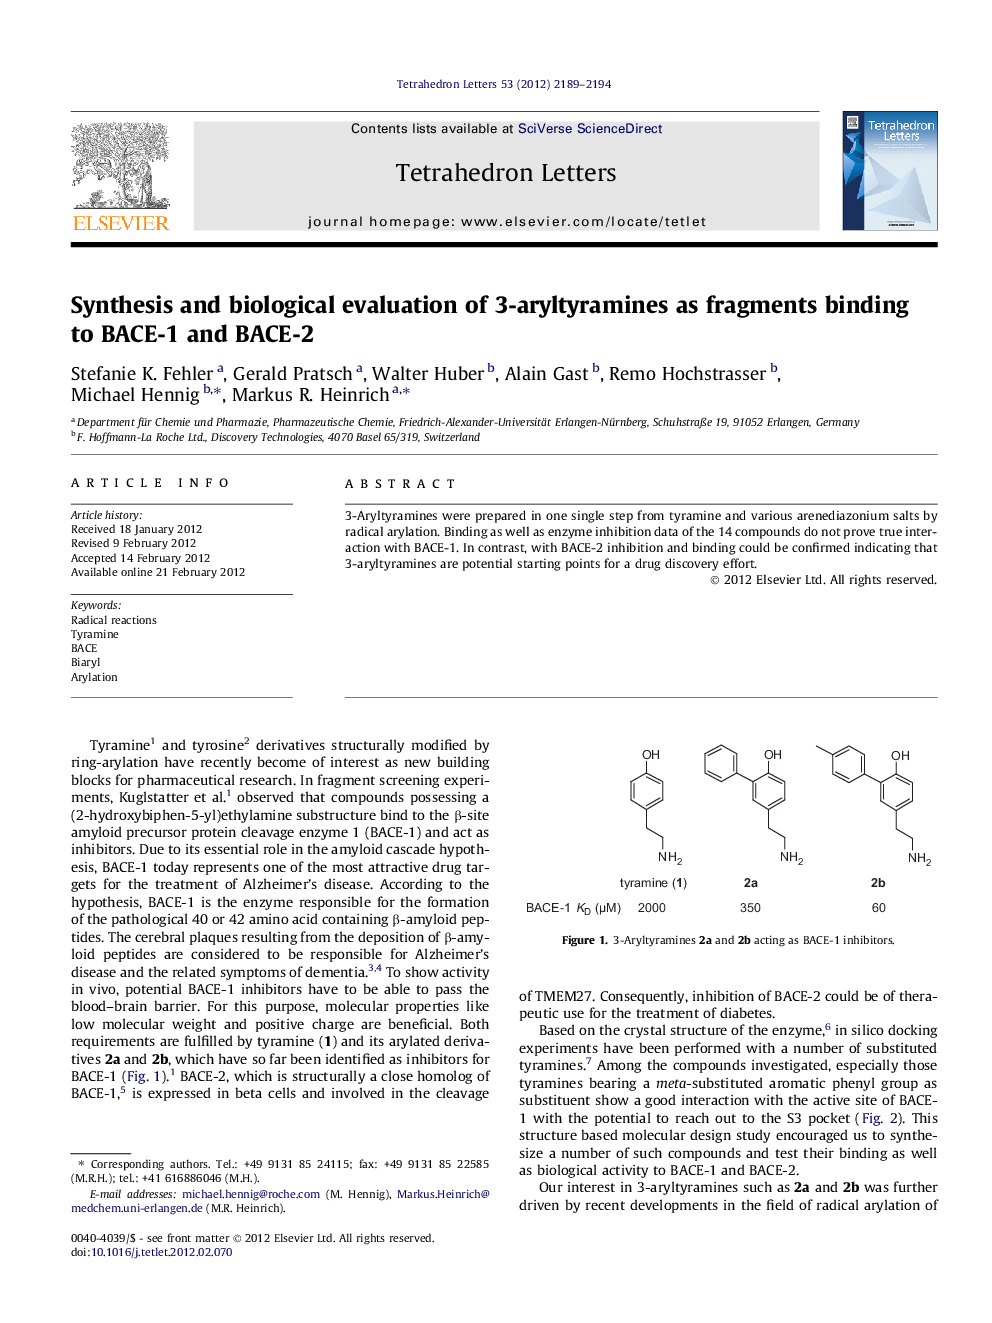 Synthesis and biological evaluation of 3-aryltyramines as fragments binding to BACE-1 and BACE-2